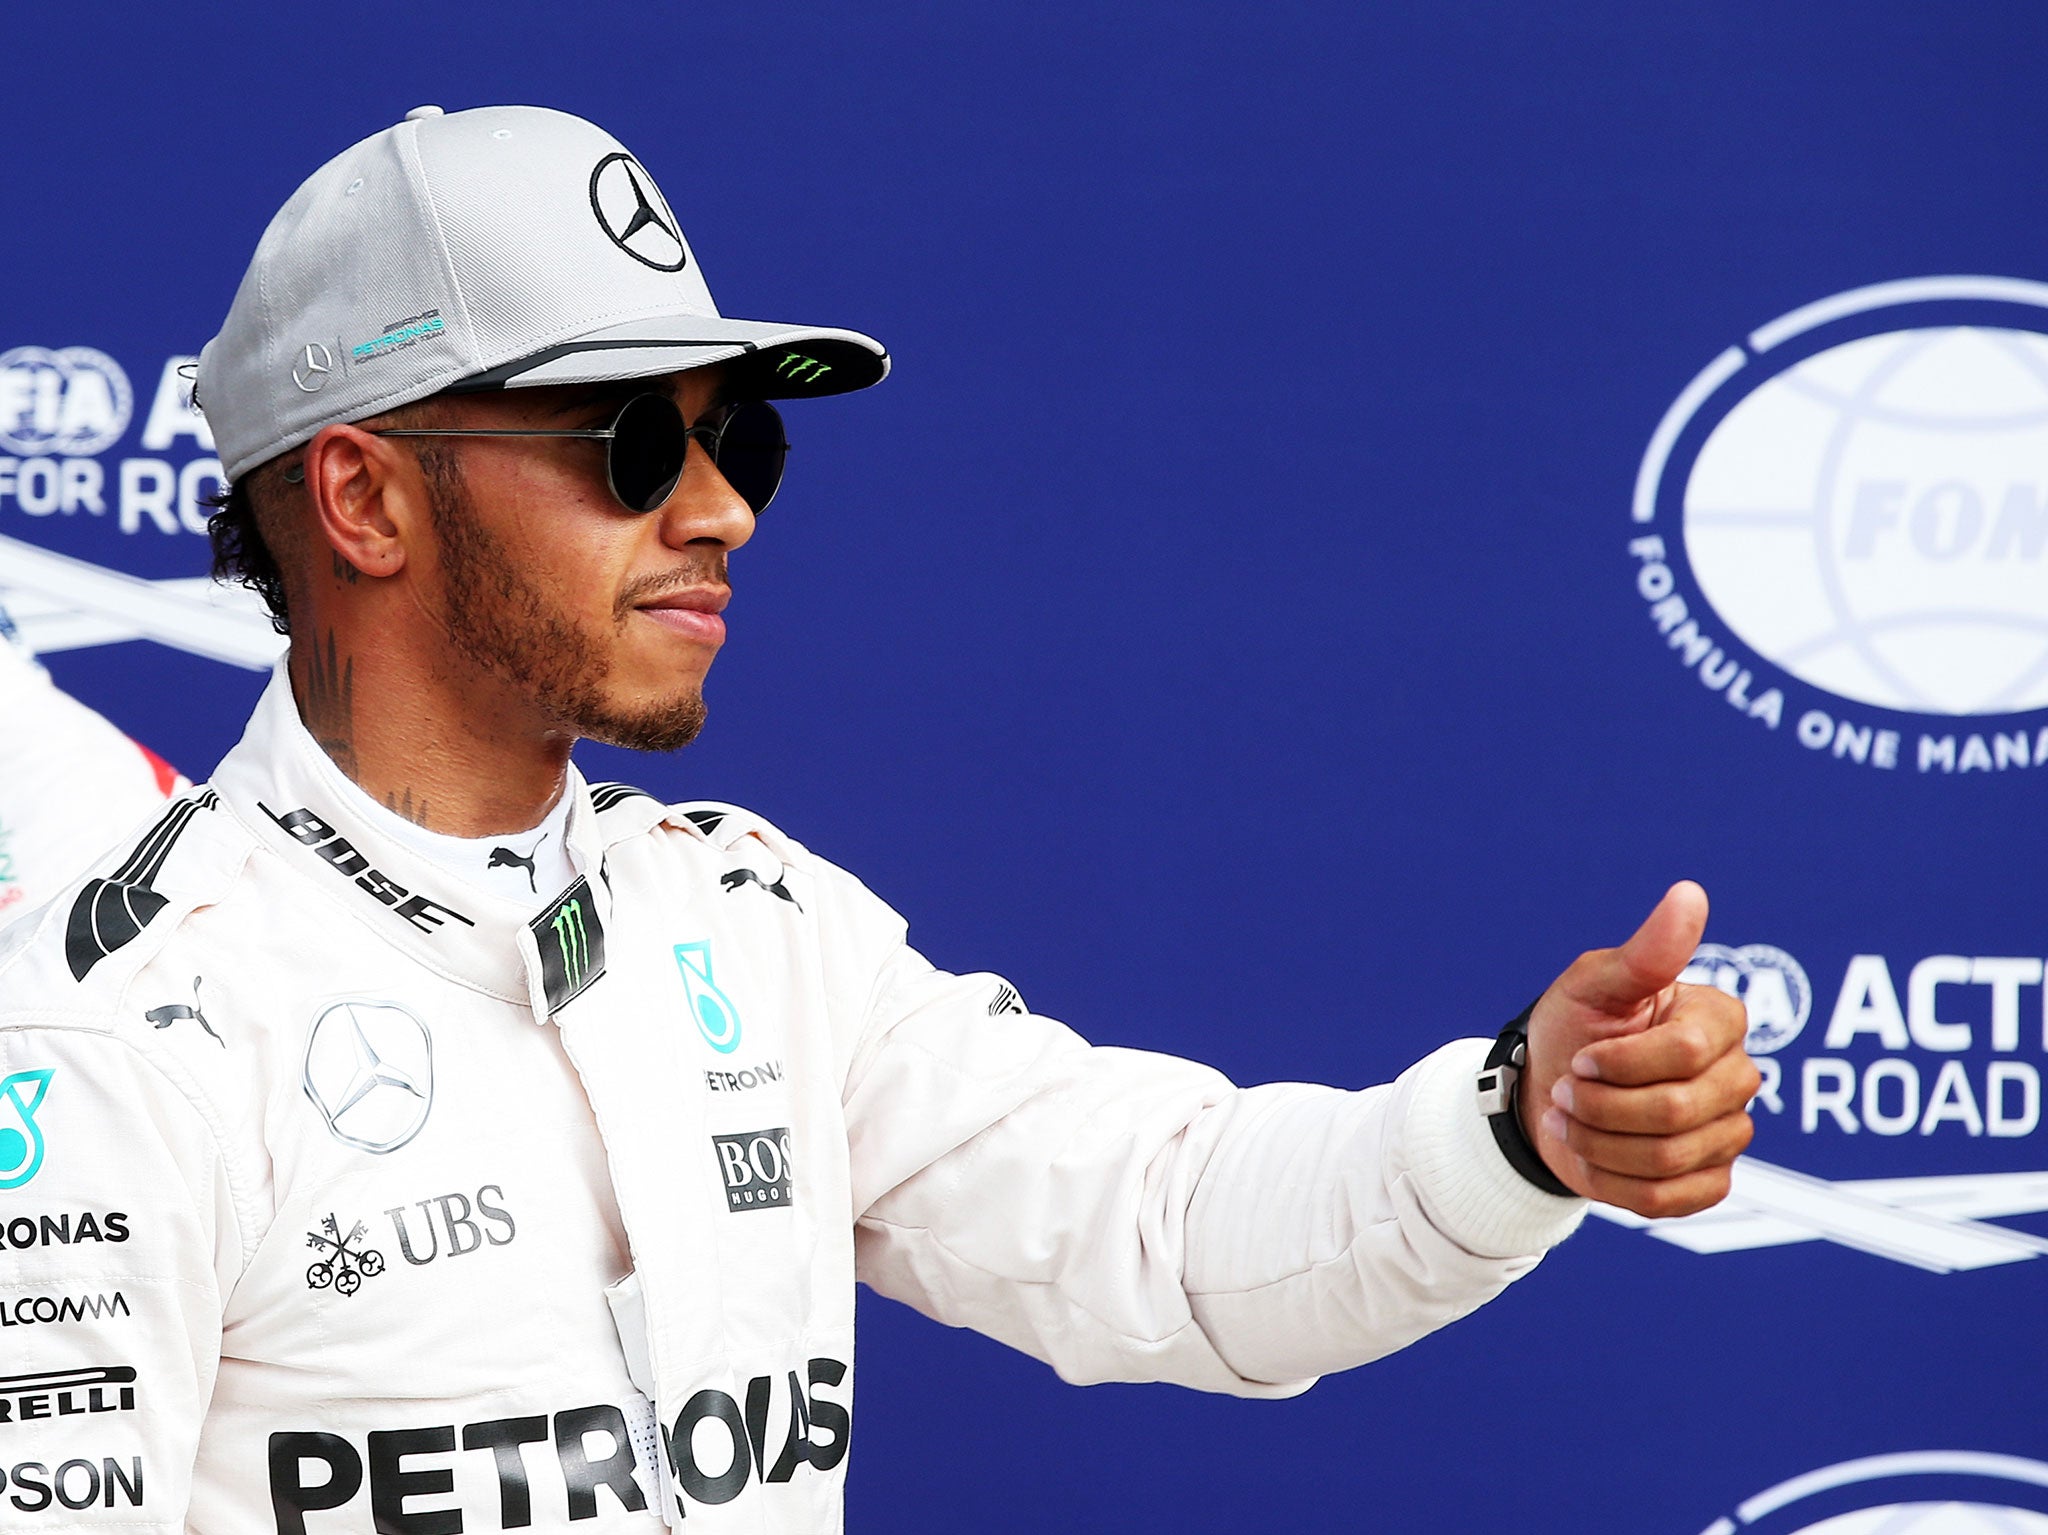 Should Hamilton carry his decisive form into tomorrow's race, Rosberg will head to Singapore with a deficit of at least 16 points